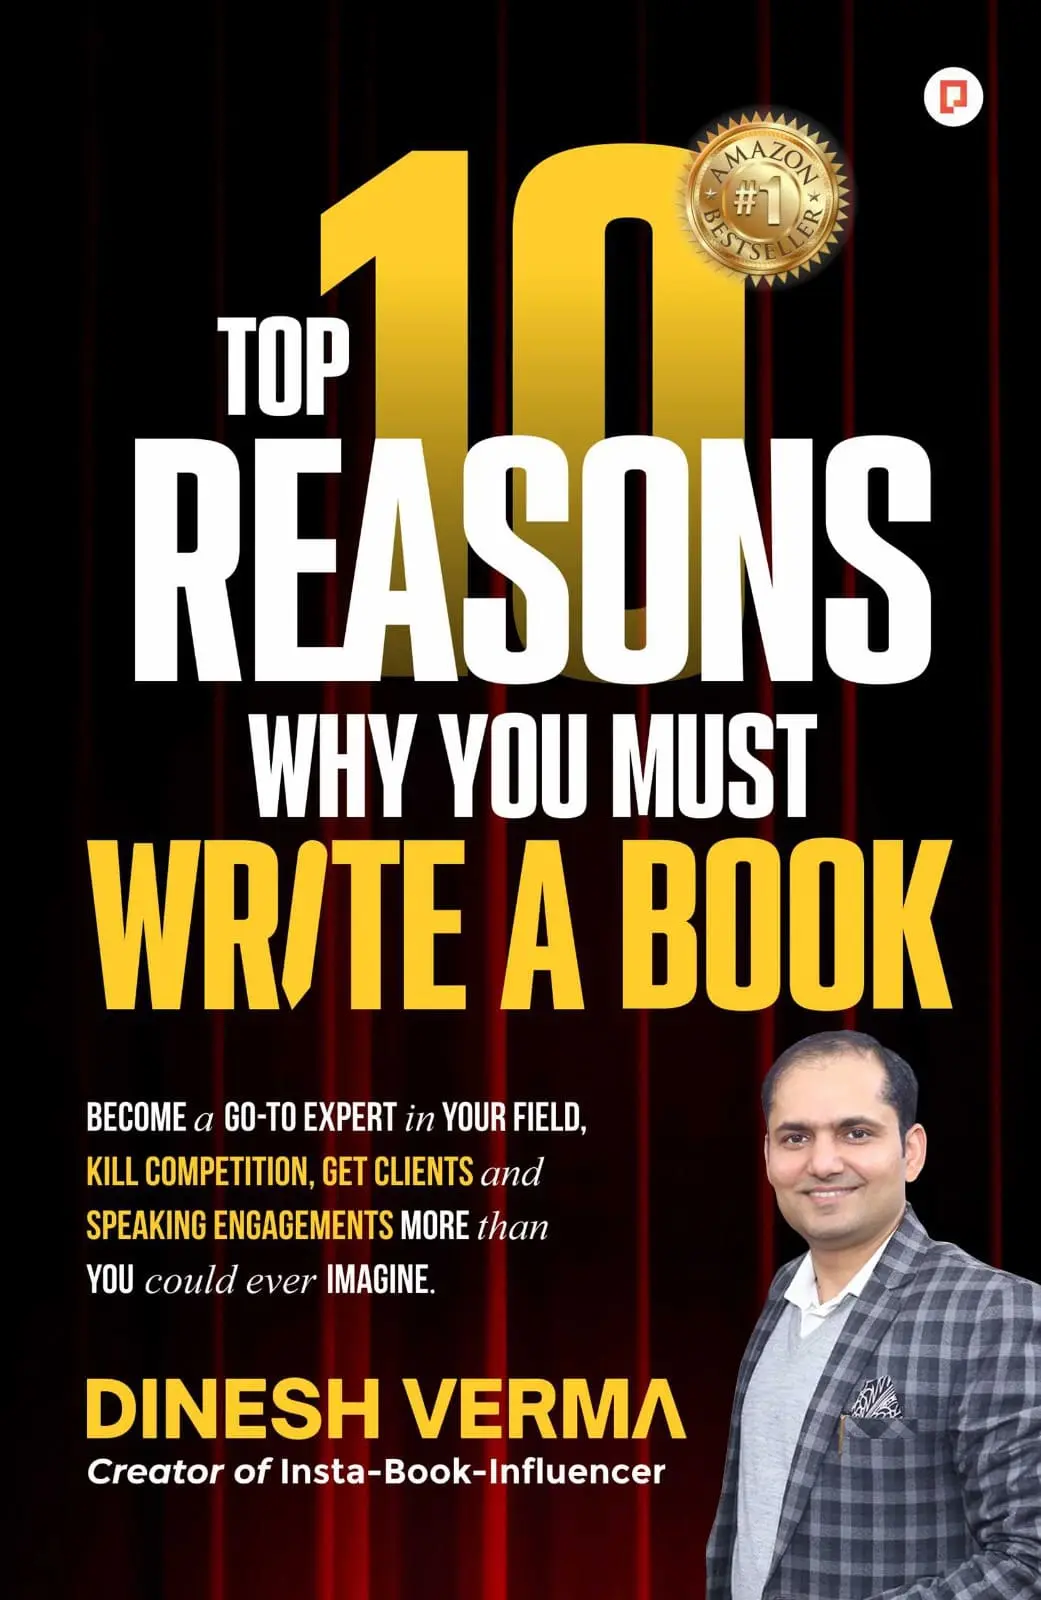 top 10 reason why you must write a book by dinesh verma, Become a Go-To Expert in Your Field, Kill Competition